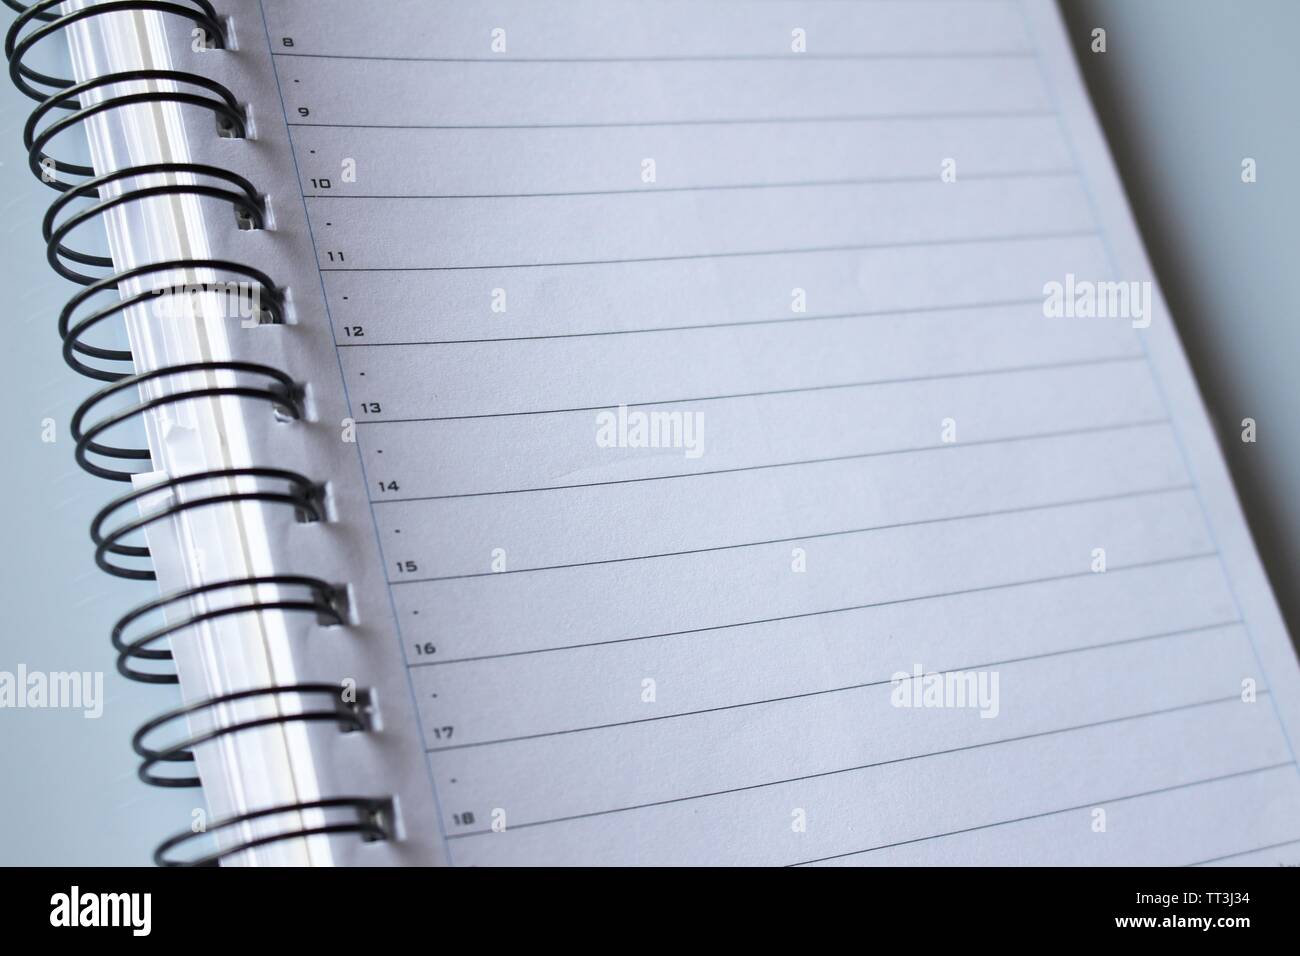 Notepad, white lined paper with calendar, spiral bound Stock Photo